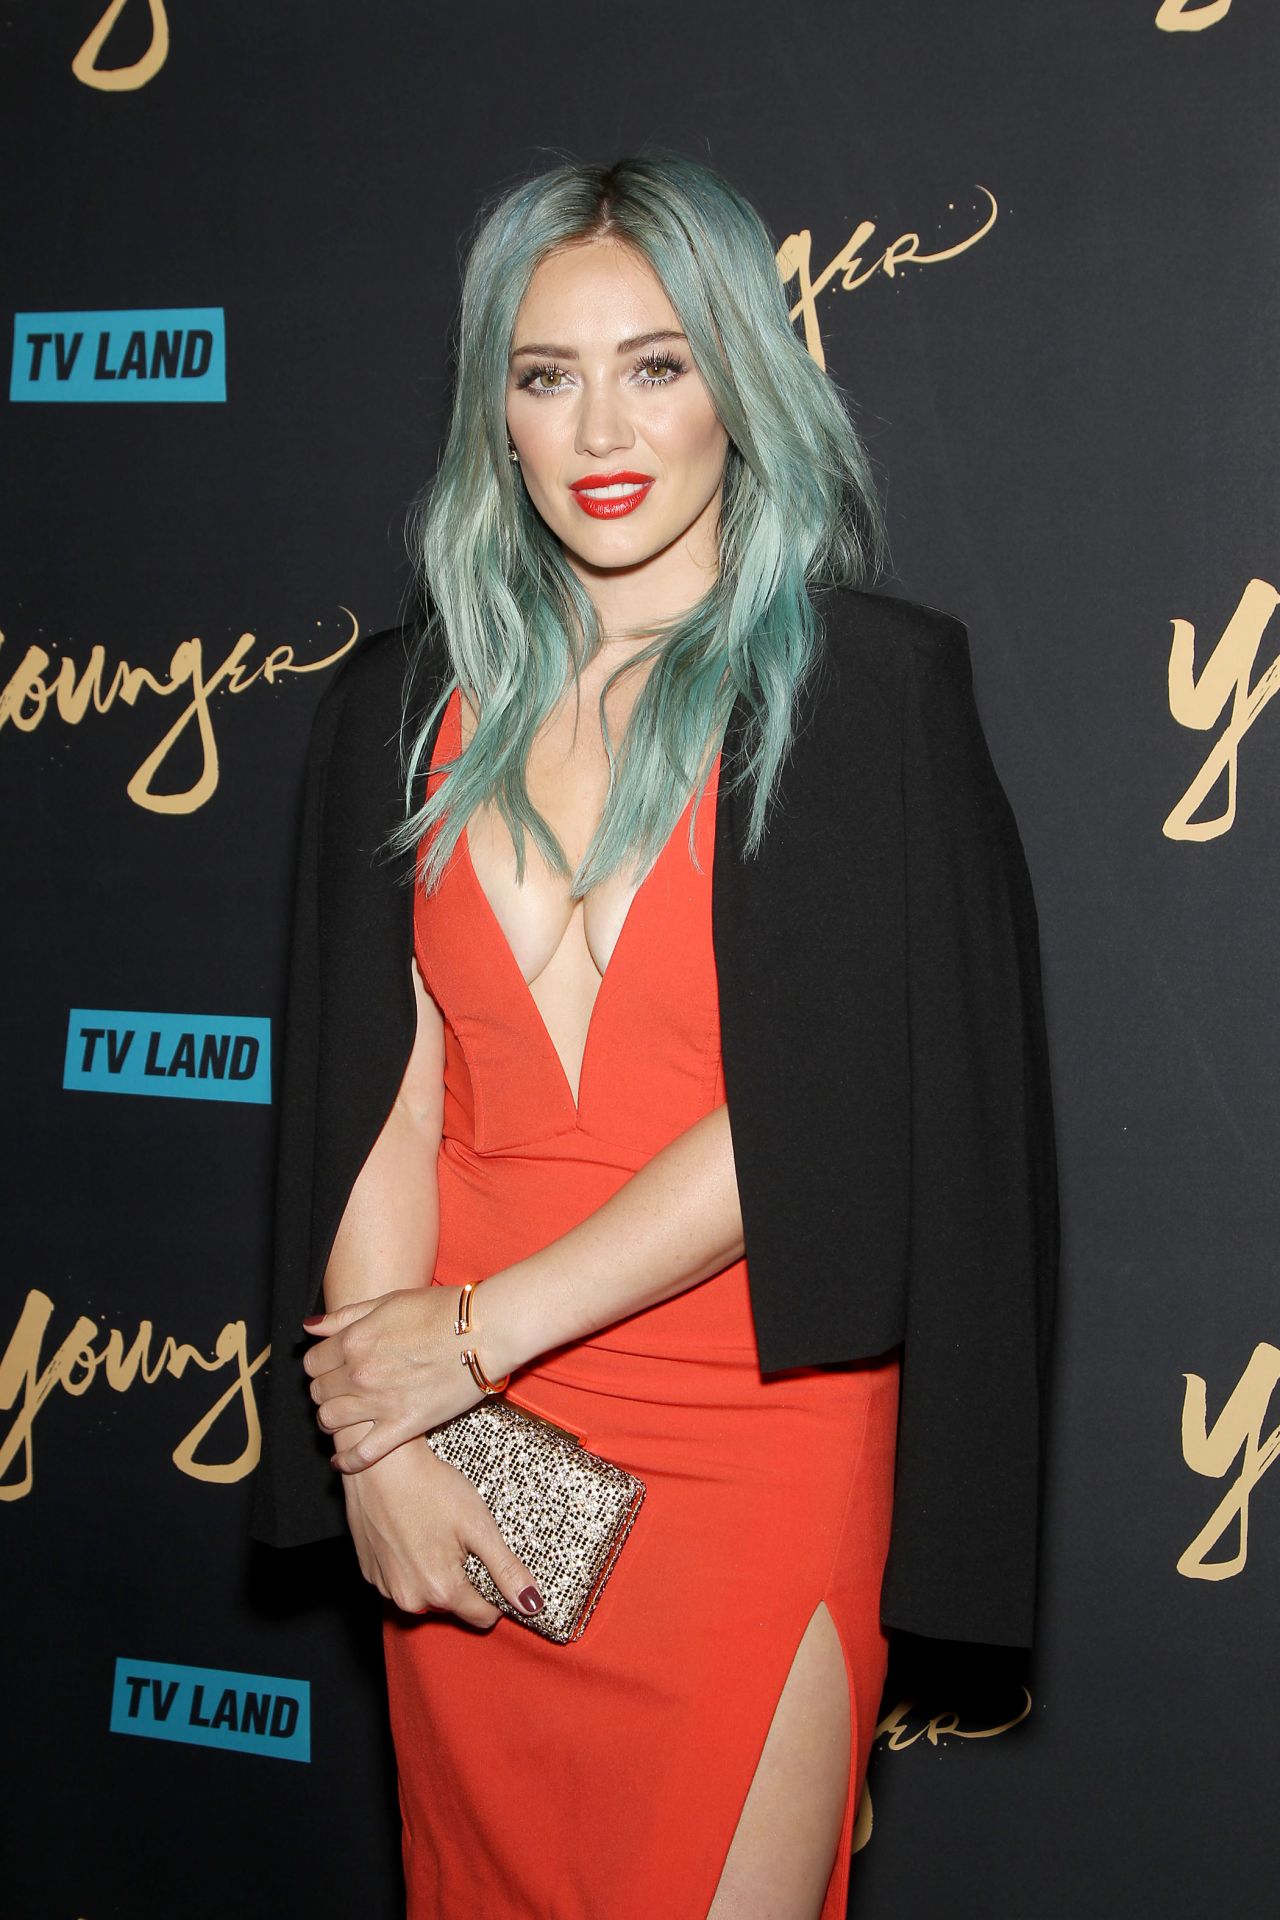 Hilary Duff - TV Land's 'Younger' Premiere in New York City